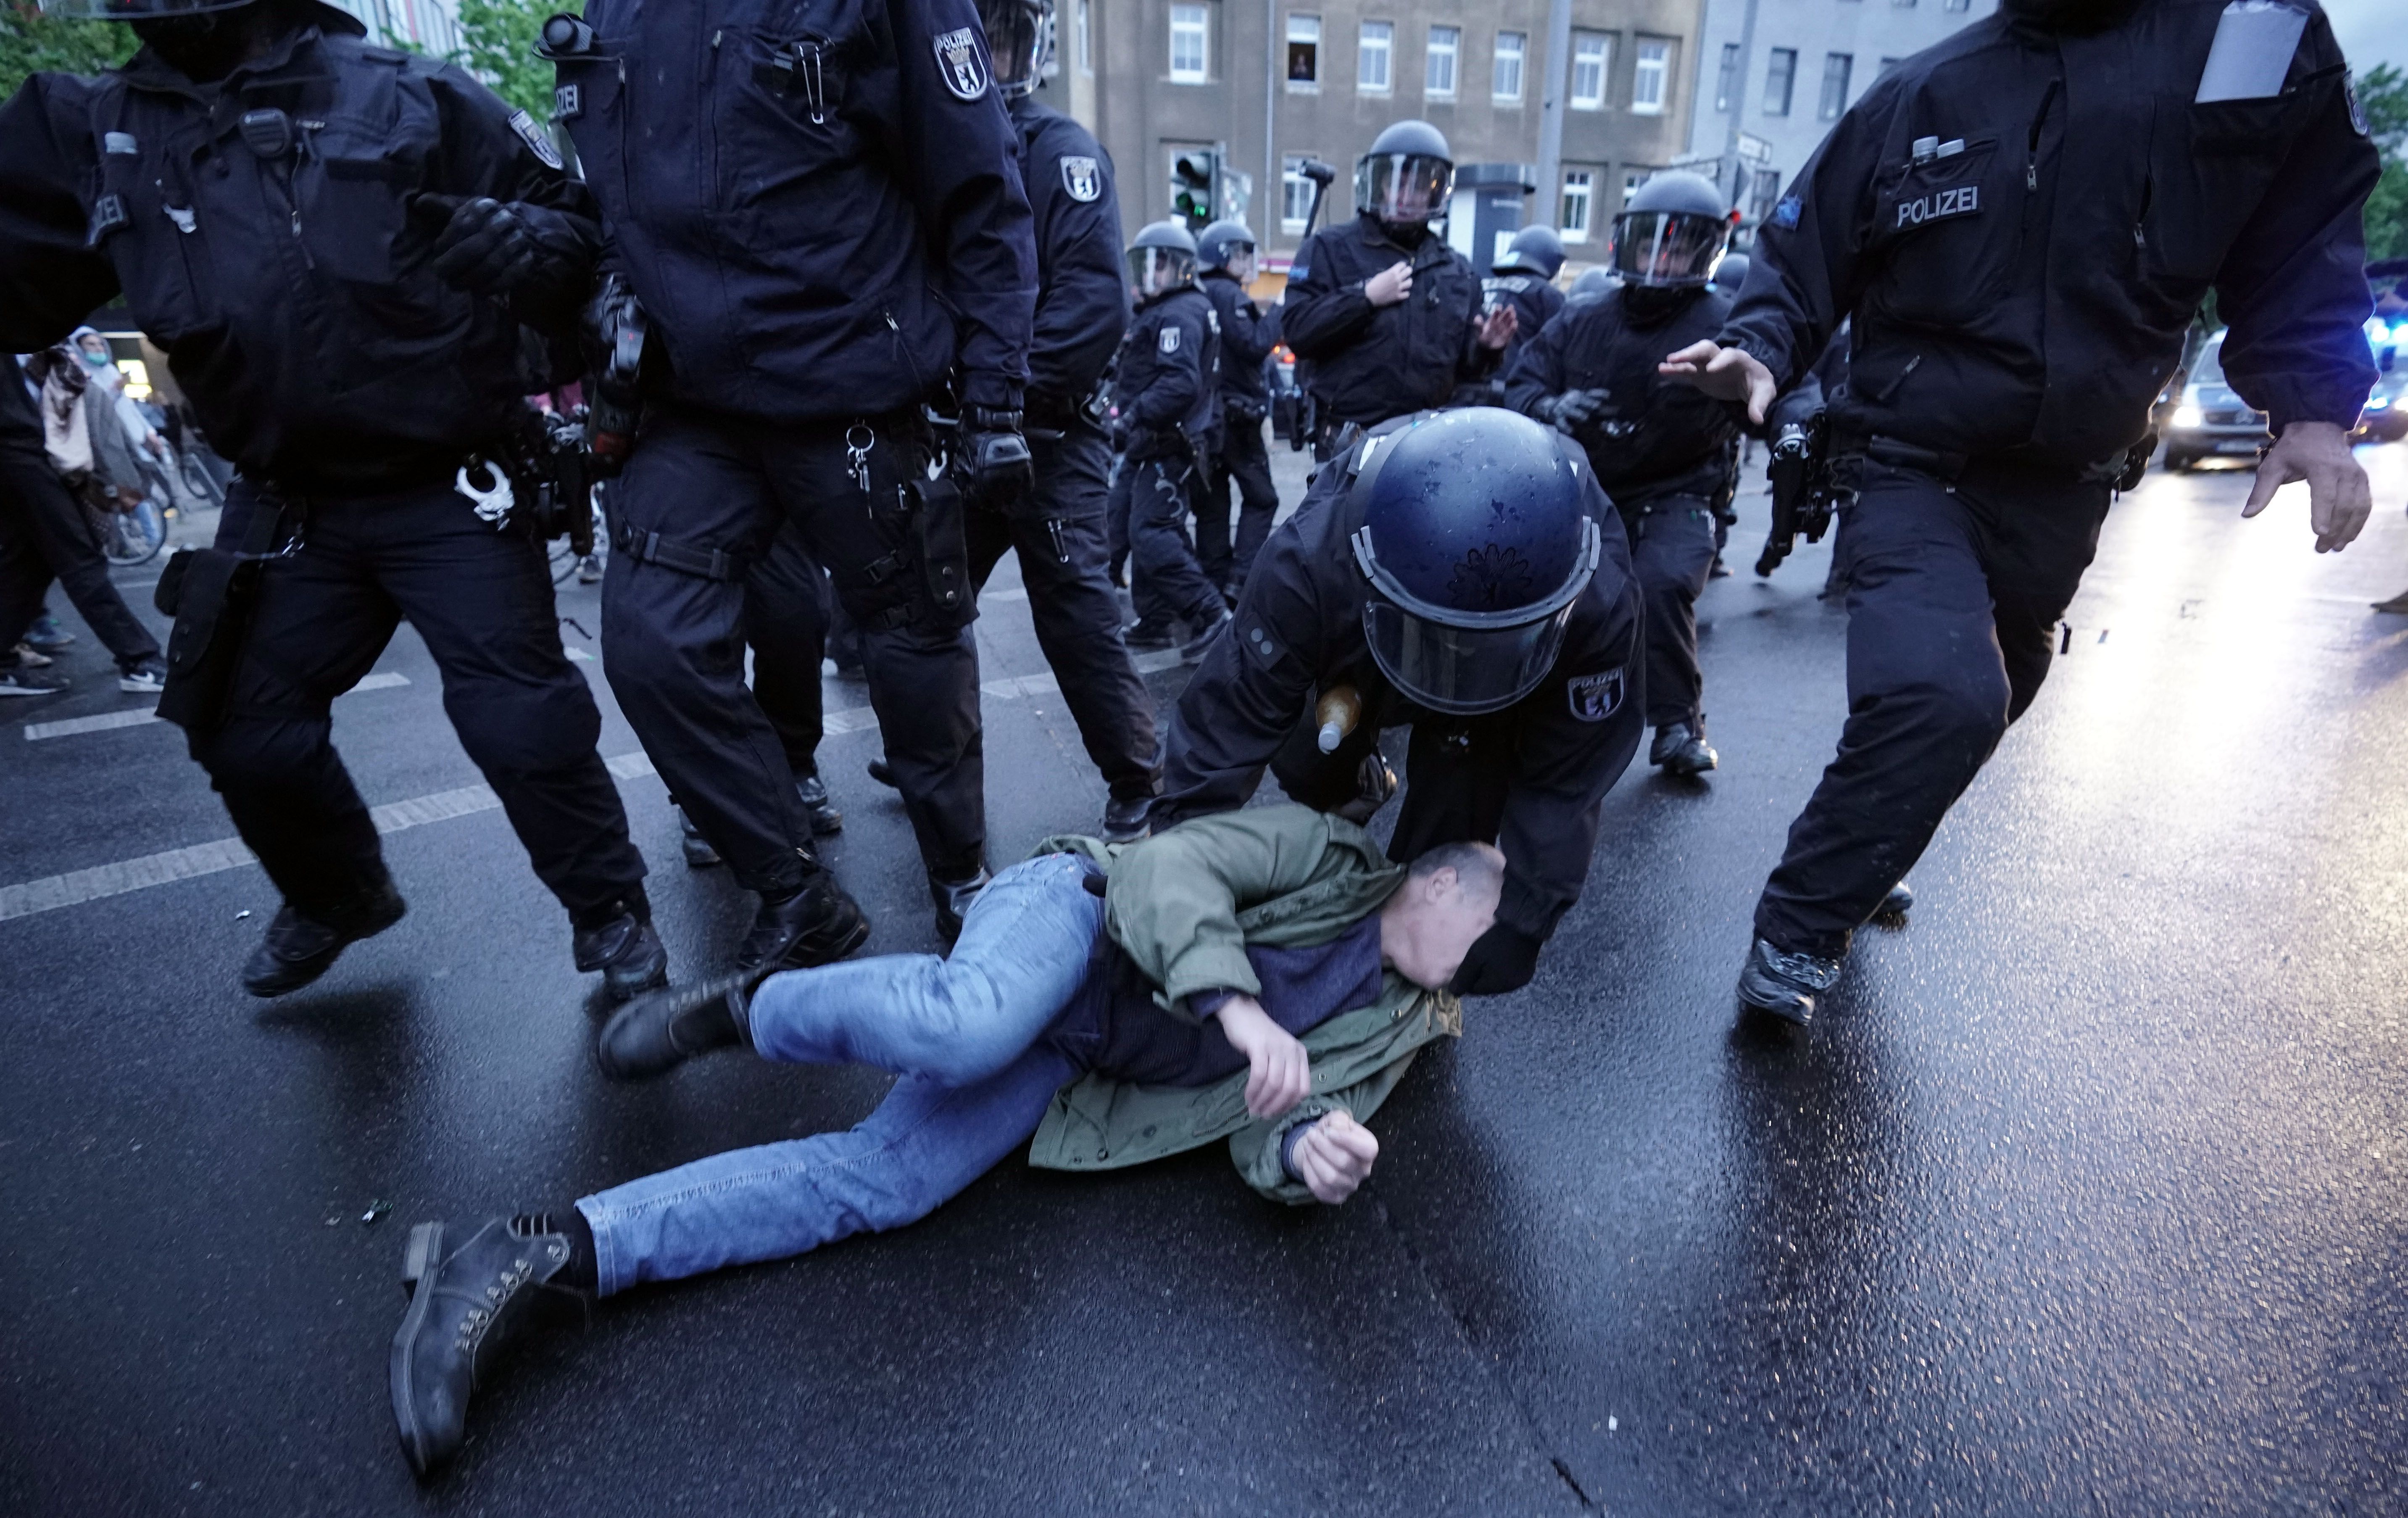 In this image, police strike a man laying on the ground